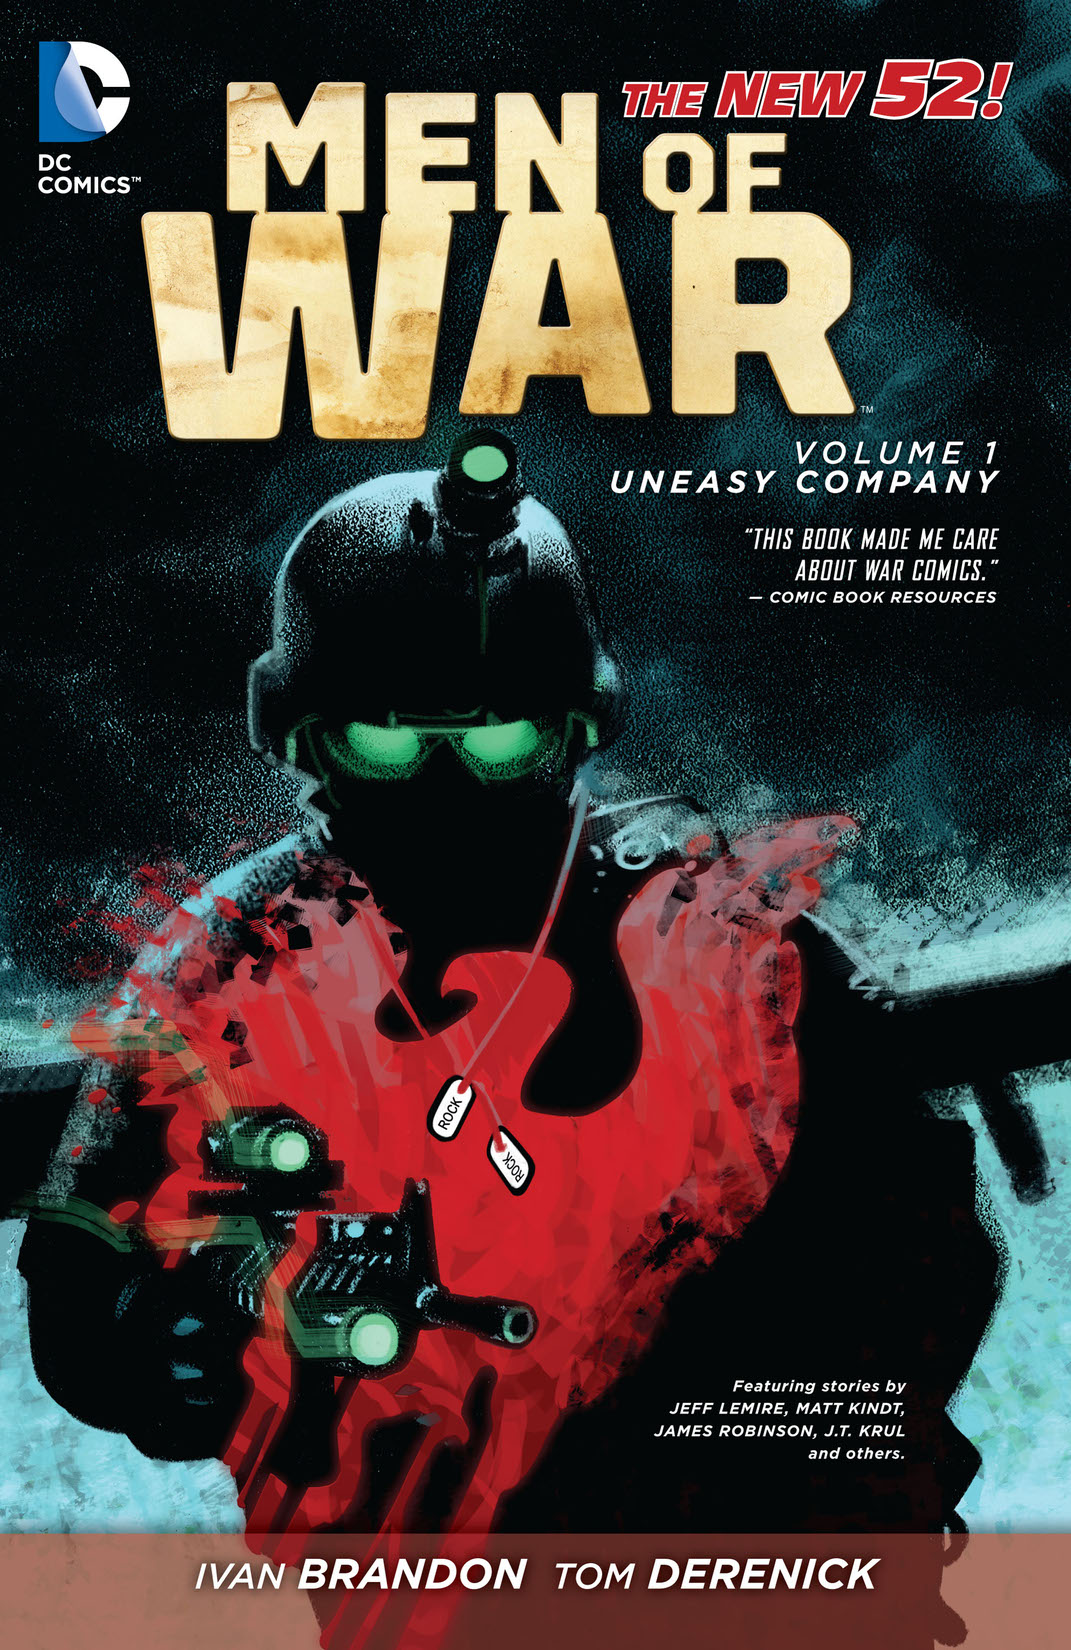 Men of War Vol. 1: Uneasy Company preview images